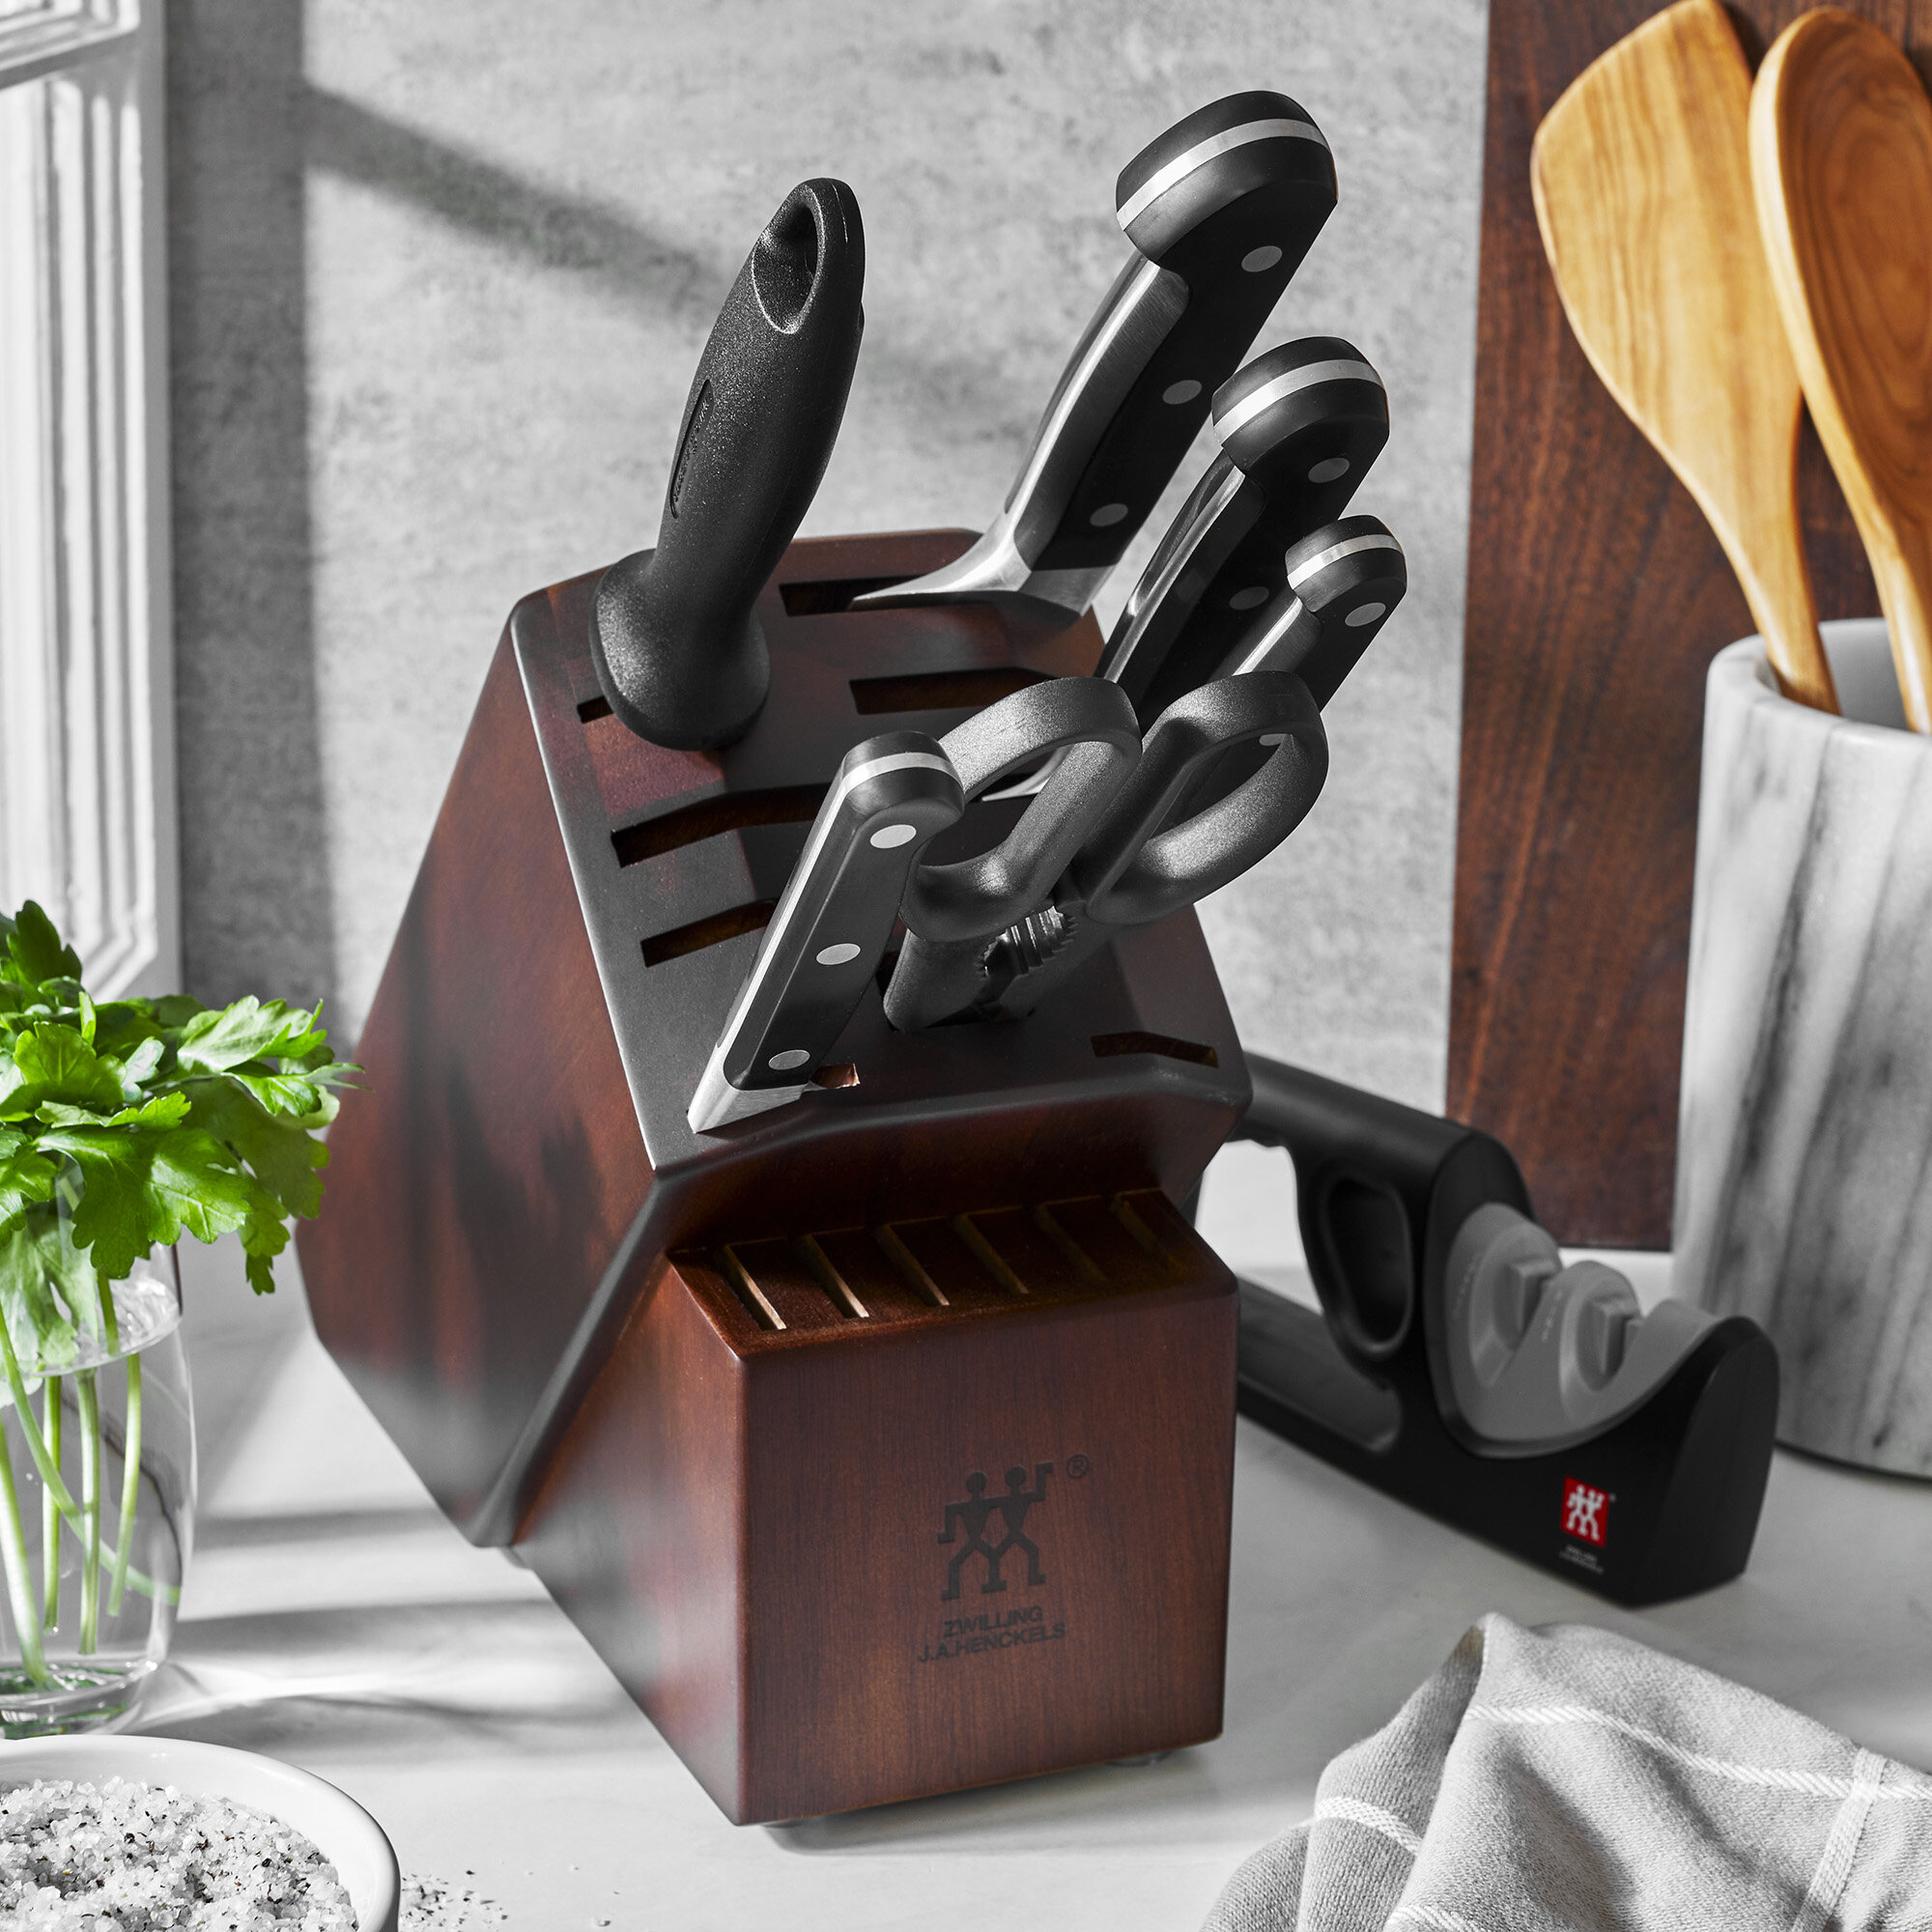 Zwilling ZWILLING Pro 17-pc Knife Block Set - Stainless Steel - Dishwasher  Safe - Includes Peeling, Paring, Utility, Santoku, Chef's, Bread Knives in  the Cutlery department at